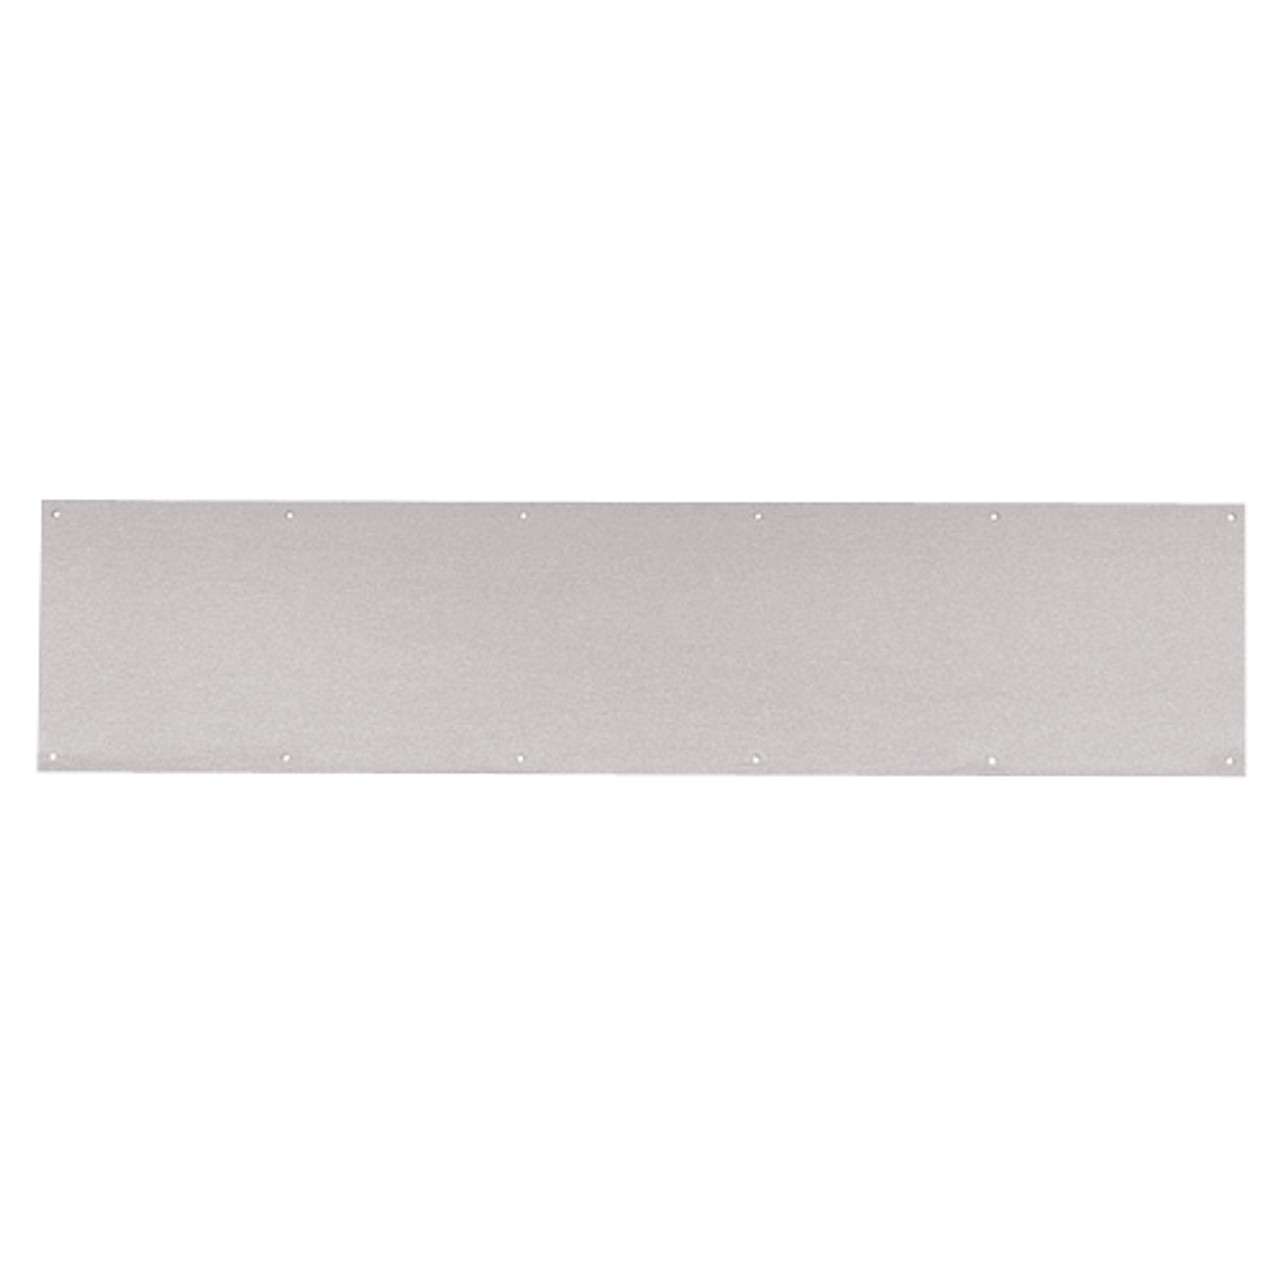 8400-US32D-34x26-B-CS Ives 8400 Series Protection Plate in Satin Stainless Steel